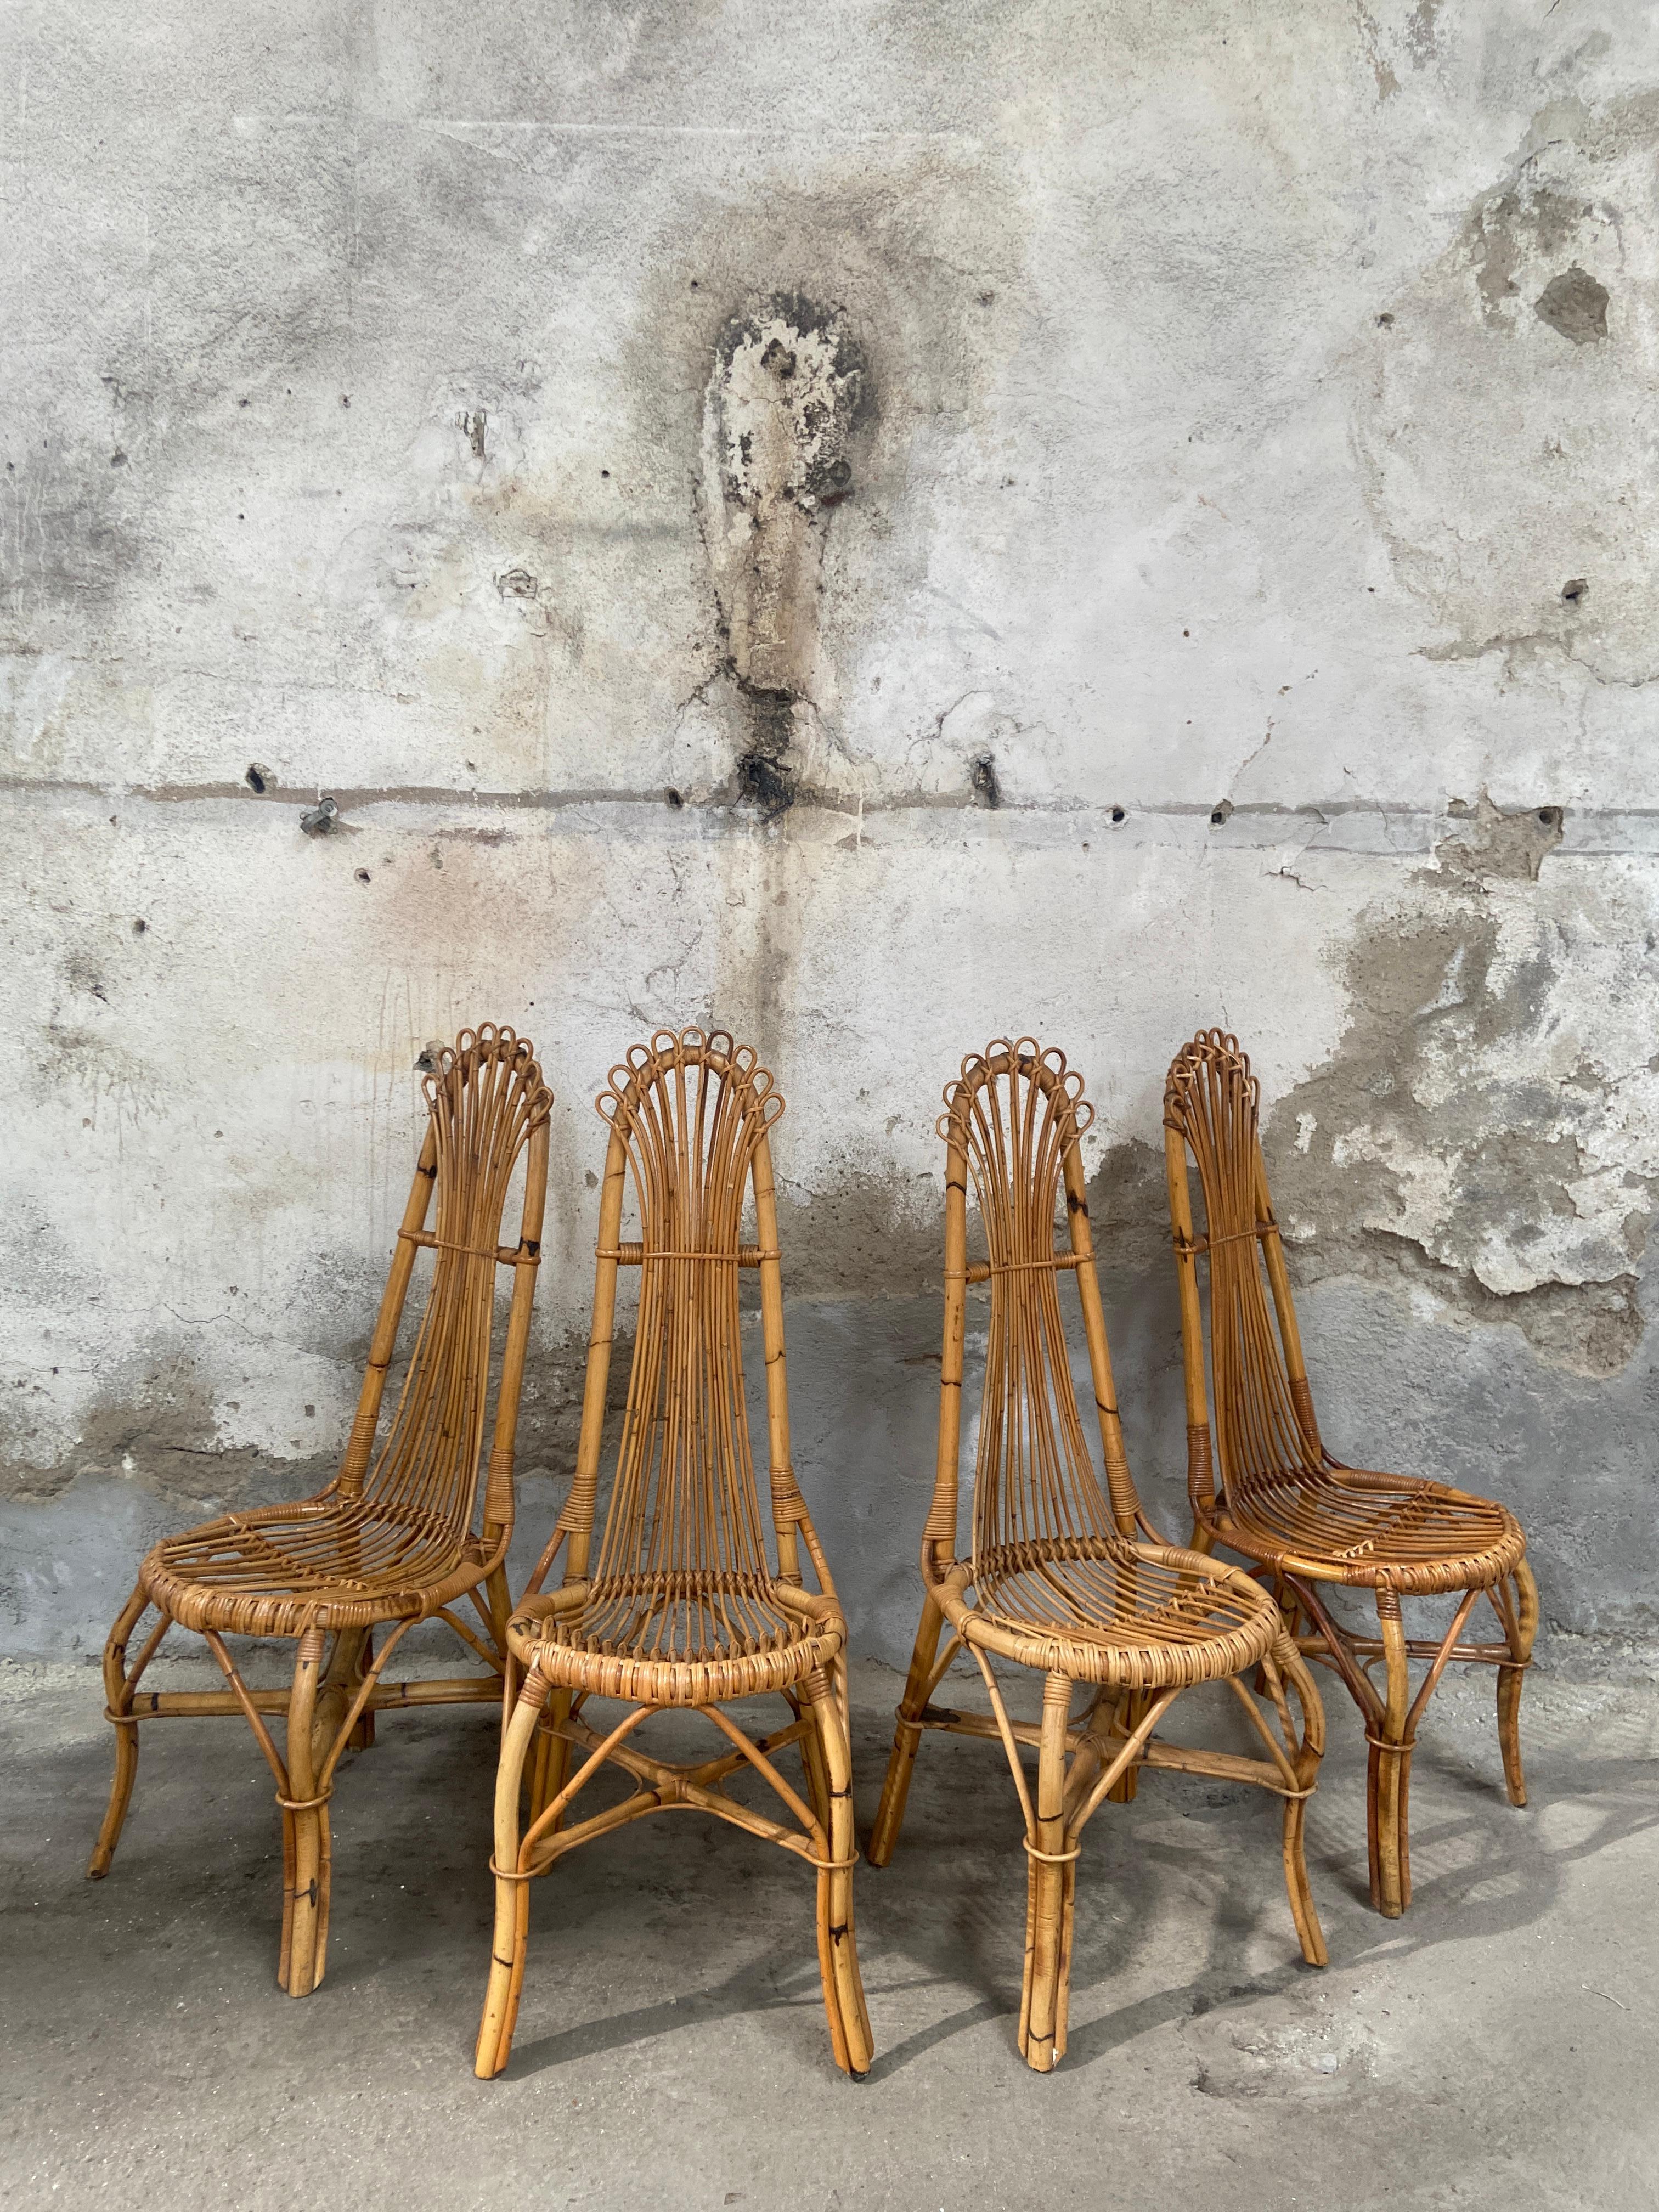 Mid-Century Modern Set of 4 Bamboo Chairs from the French Riviera, 1970s In Good Condition For Sale In Prato, IT